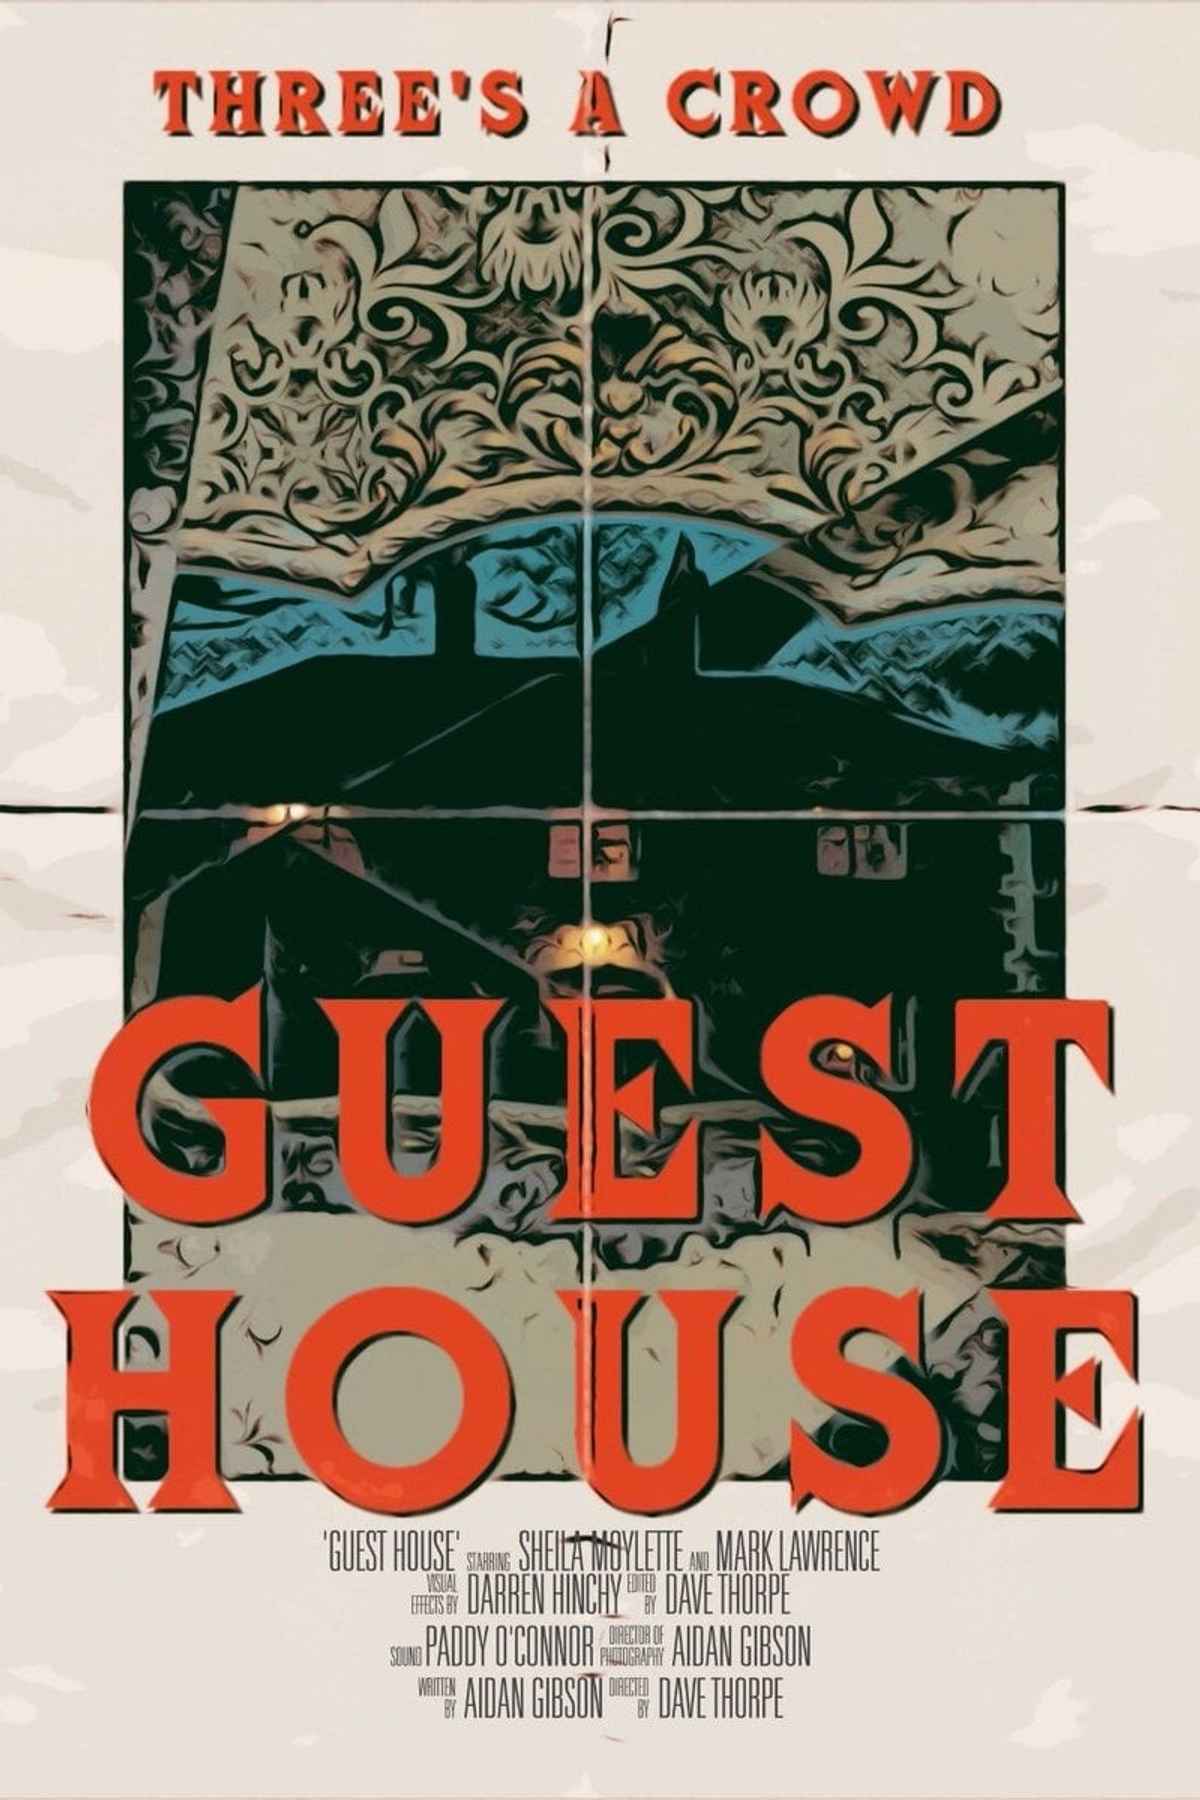 the guest house movie free online